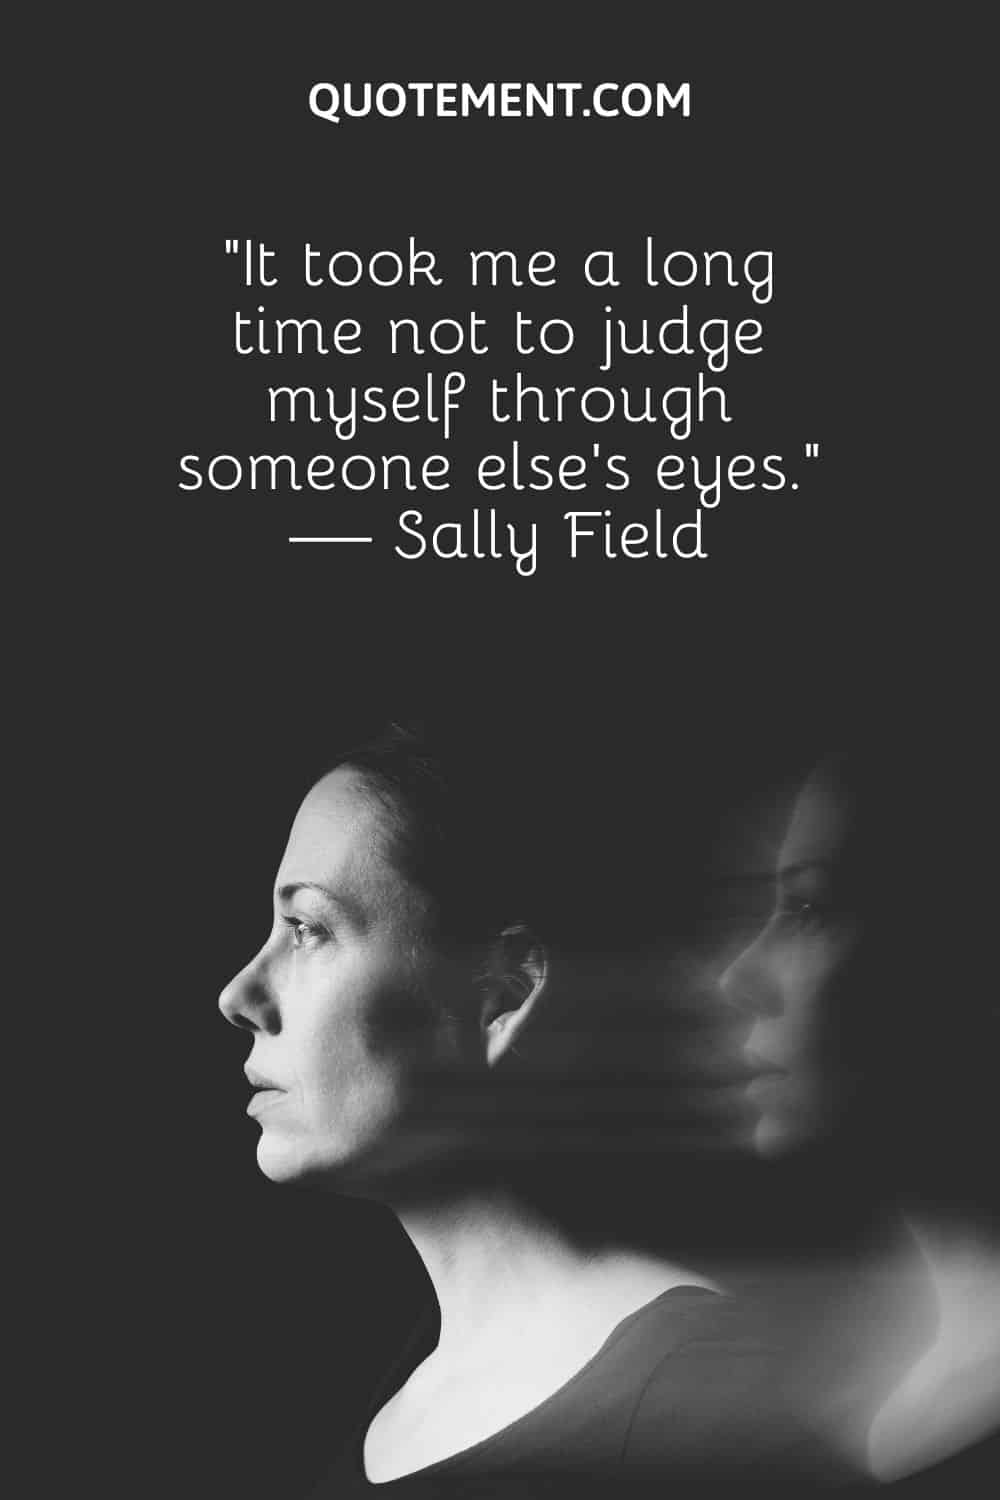 It took me a long time not to judge myself through someone else's eyes. — Sally Field